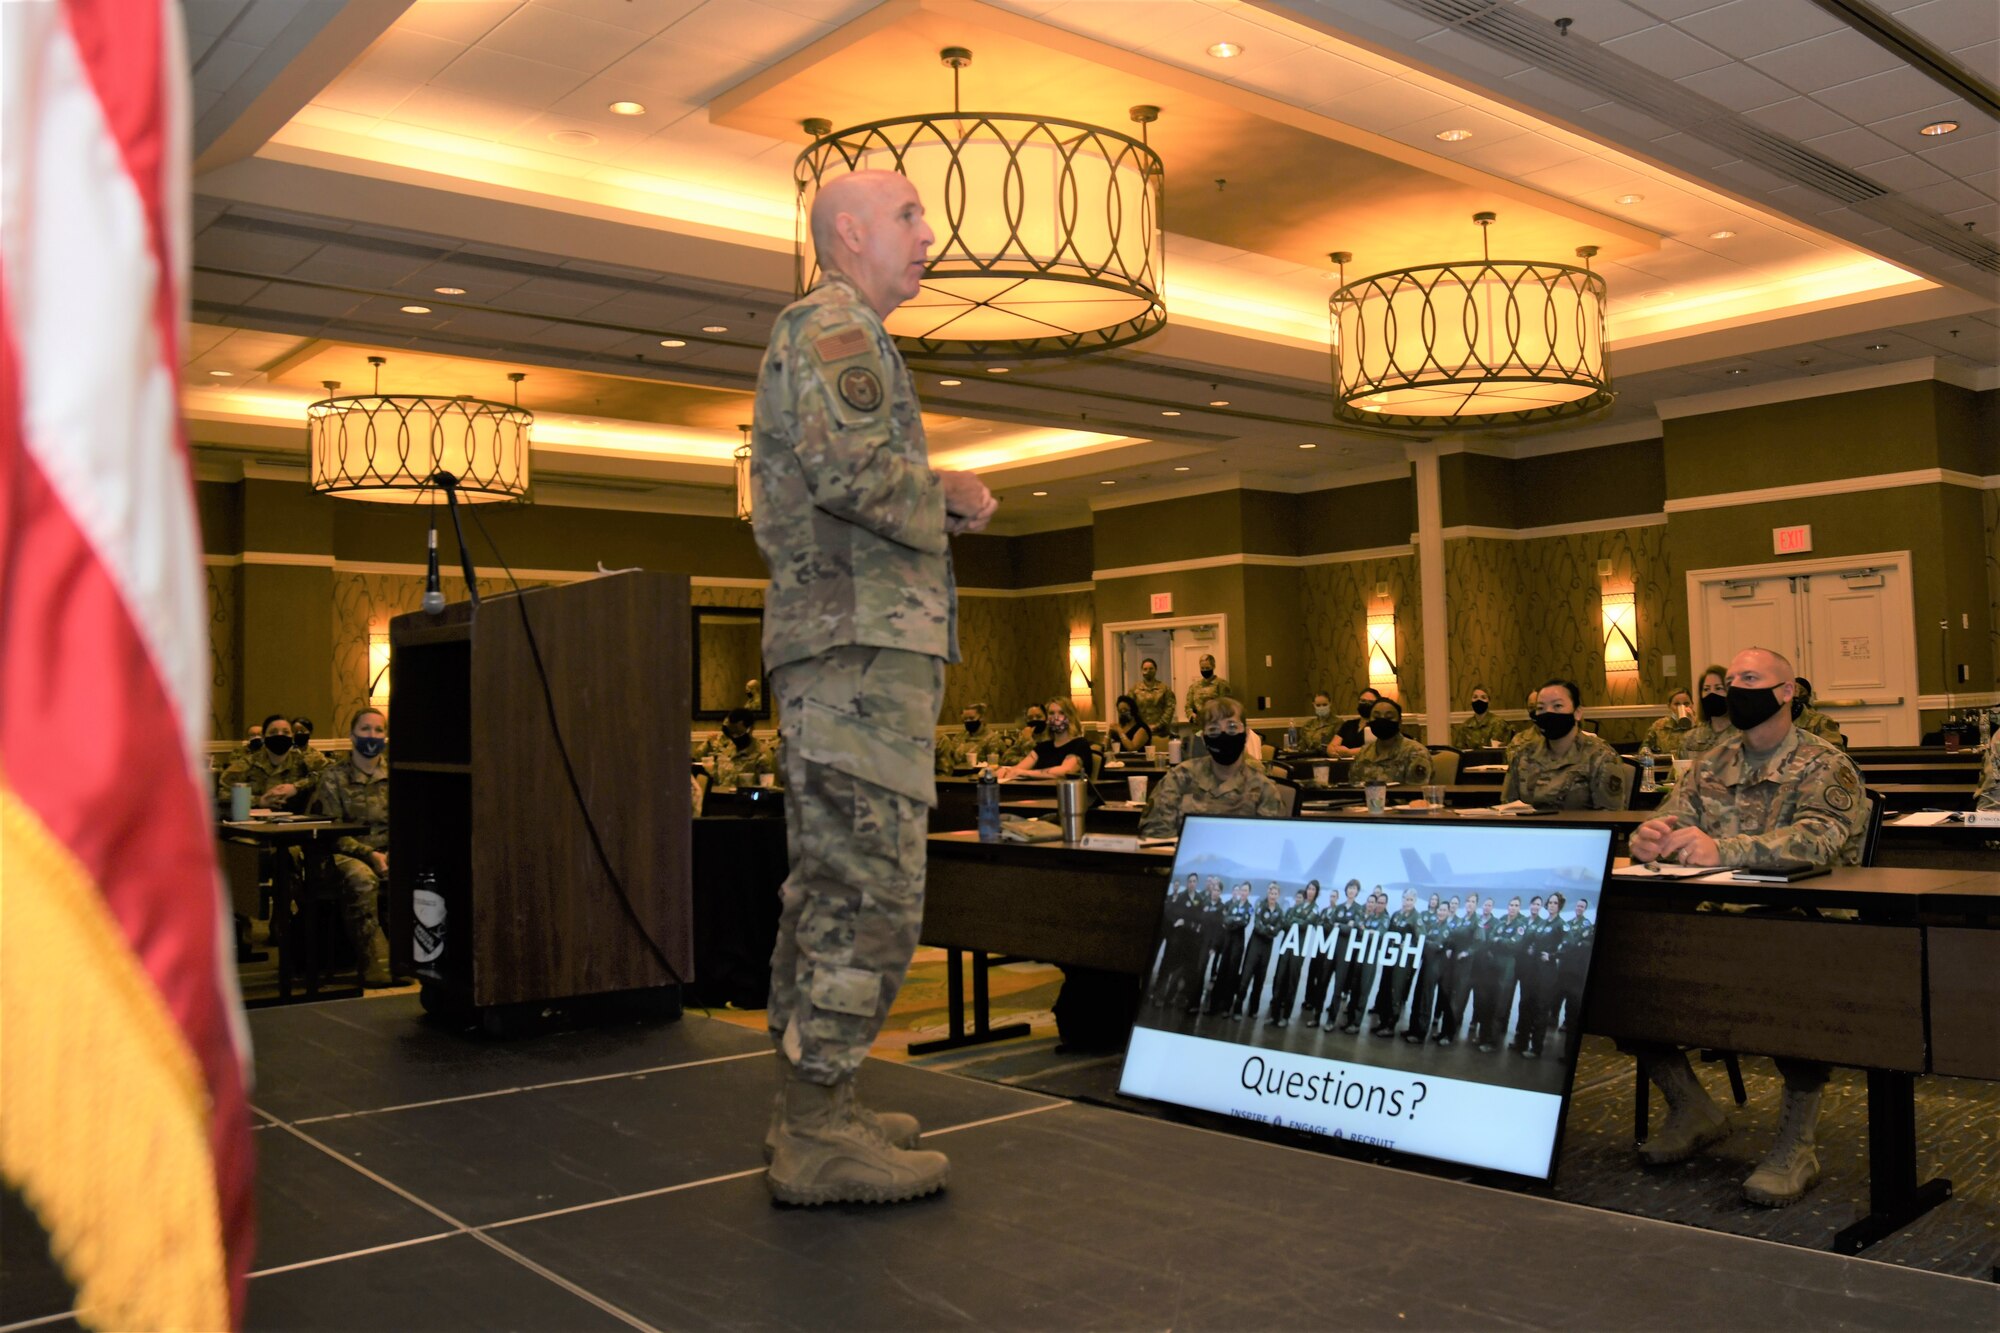 Maj. Gen. Ed Thomas, Air Force Recruiting Service commander, takes questions from the audience during opening remarks at the “Celebrating Sisterhood Through Empowerment, Progress, and Change” Women’s Symposium in San Antonio, Texas, Aug. 10, 2021. The symposium lasted through Aug. 12 and had more than 100 participants from throughout the U.S. representing the Air Force, Air Force Reserve, and Air National Guard.